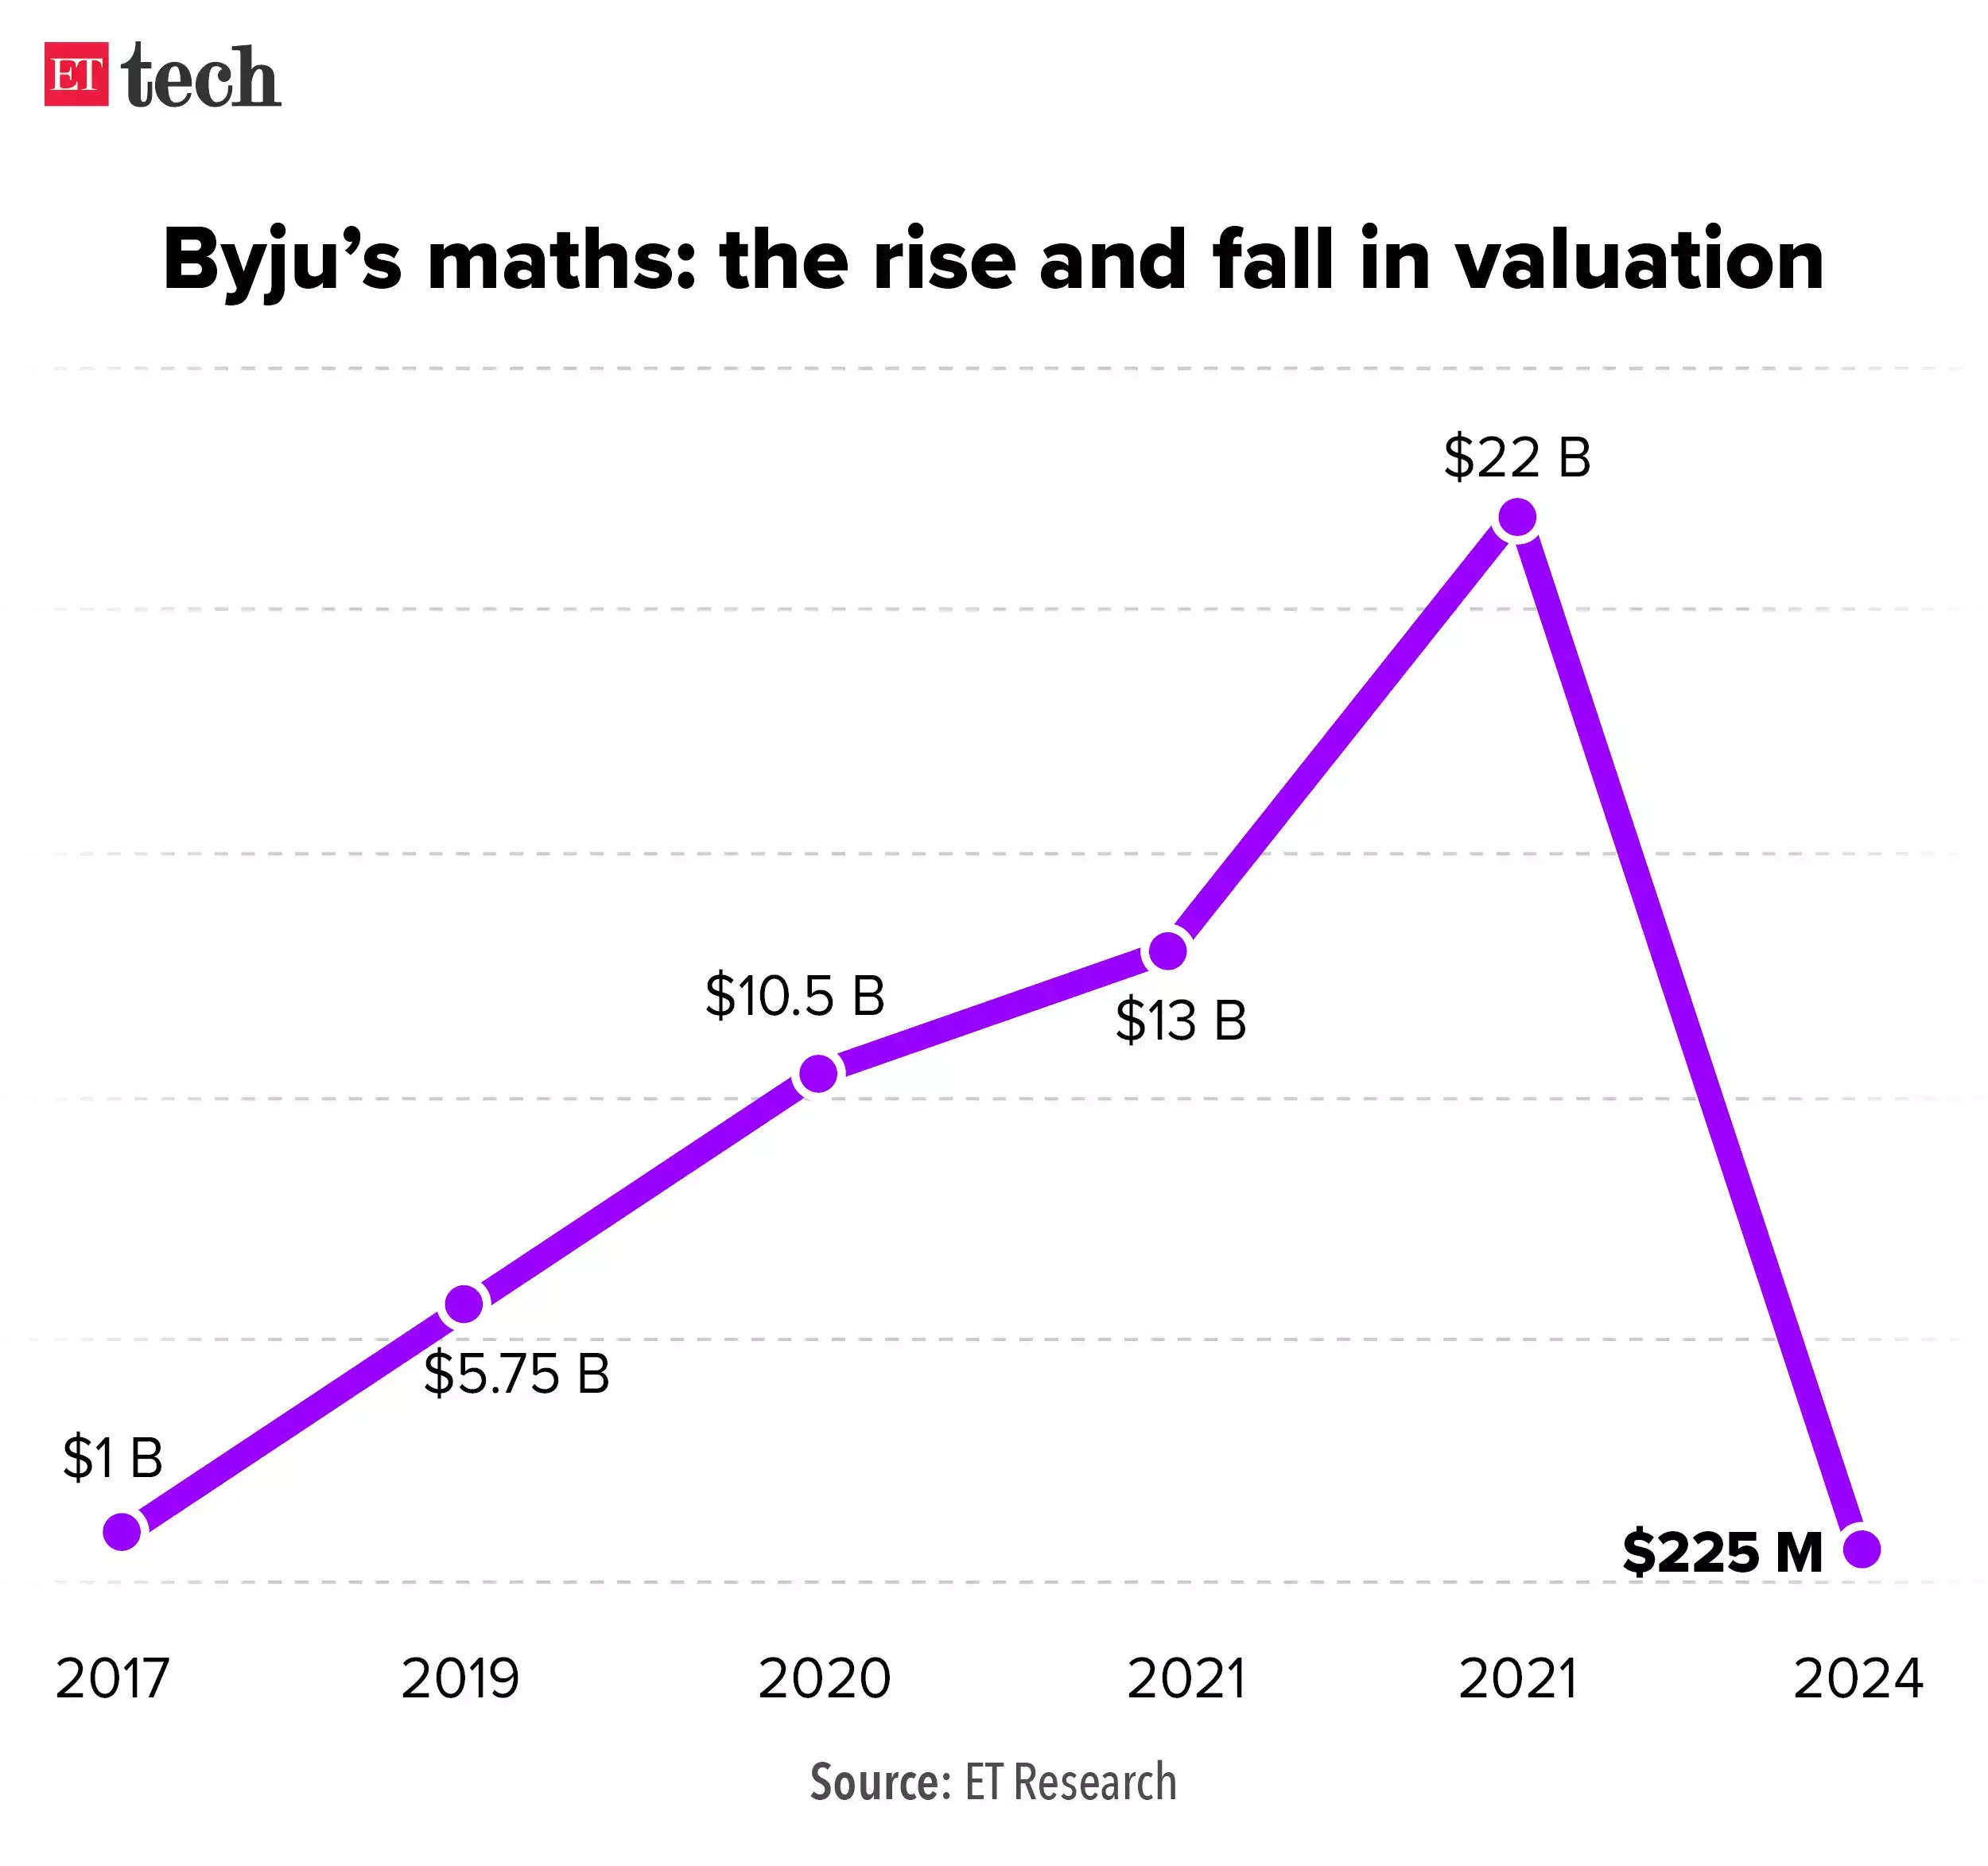 byjus new valuation